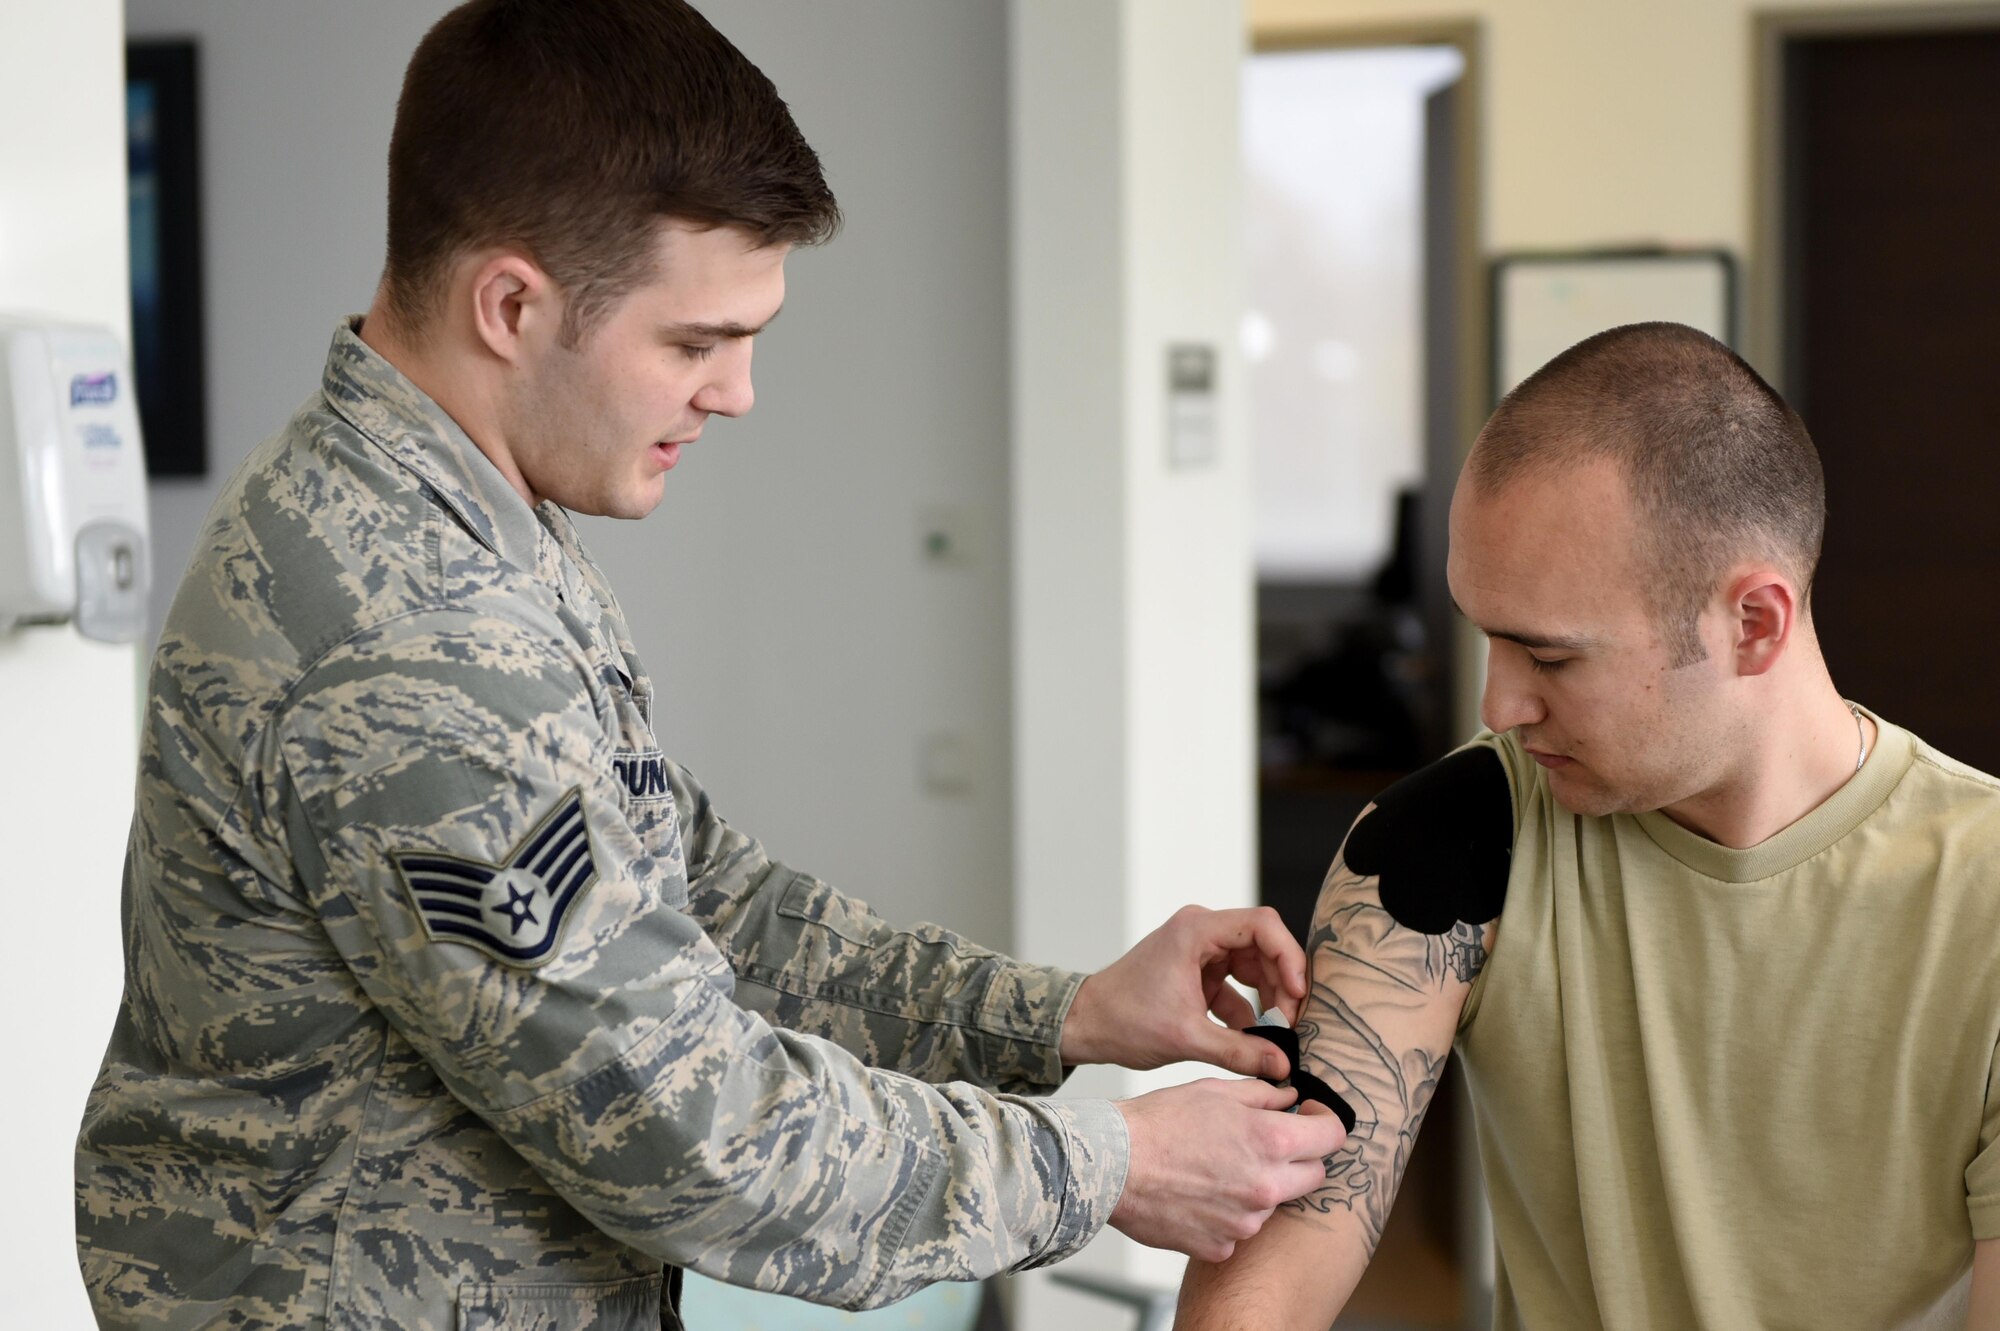 Staff Sgt. Daniel Dunwald, 52nd Medical Operations Squadron physical therapy technician and certified kinesio tape practitioner, teaches others the benefits of using k-tape during the recent medical group training day at Spangdahlem Air Base, Germany, April 21, 2017. Kinesio taping is a procedure intended to decrease pain and inflammation, stimulate blood and lymph circulation, aid postural correction, enhance athletic performance and prevent musculoskeletal injuries. (U.S. Air Force photo by Tech. Sgt. Staci Miller)